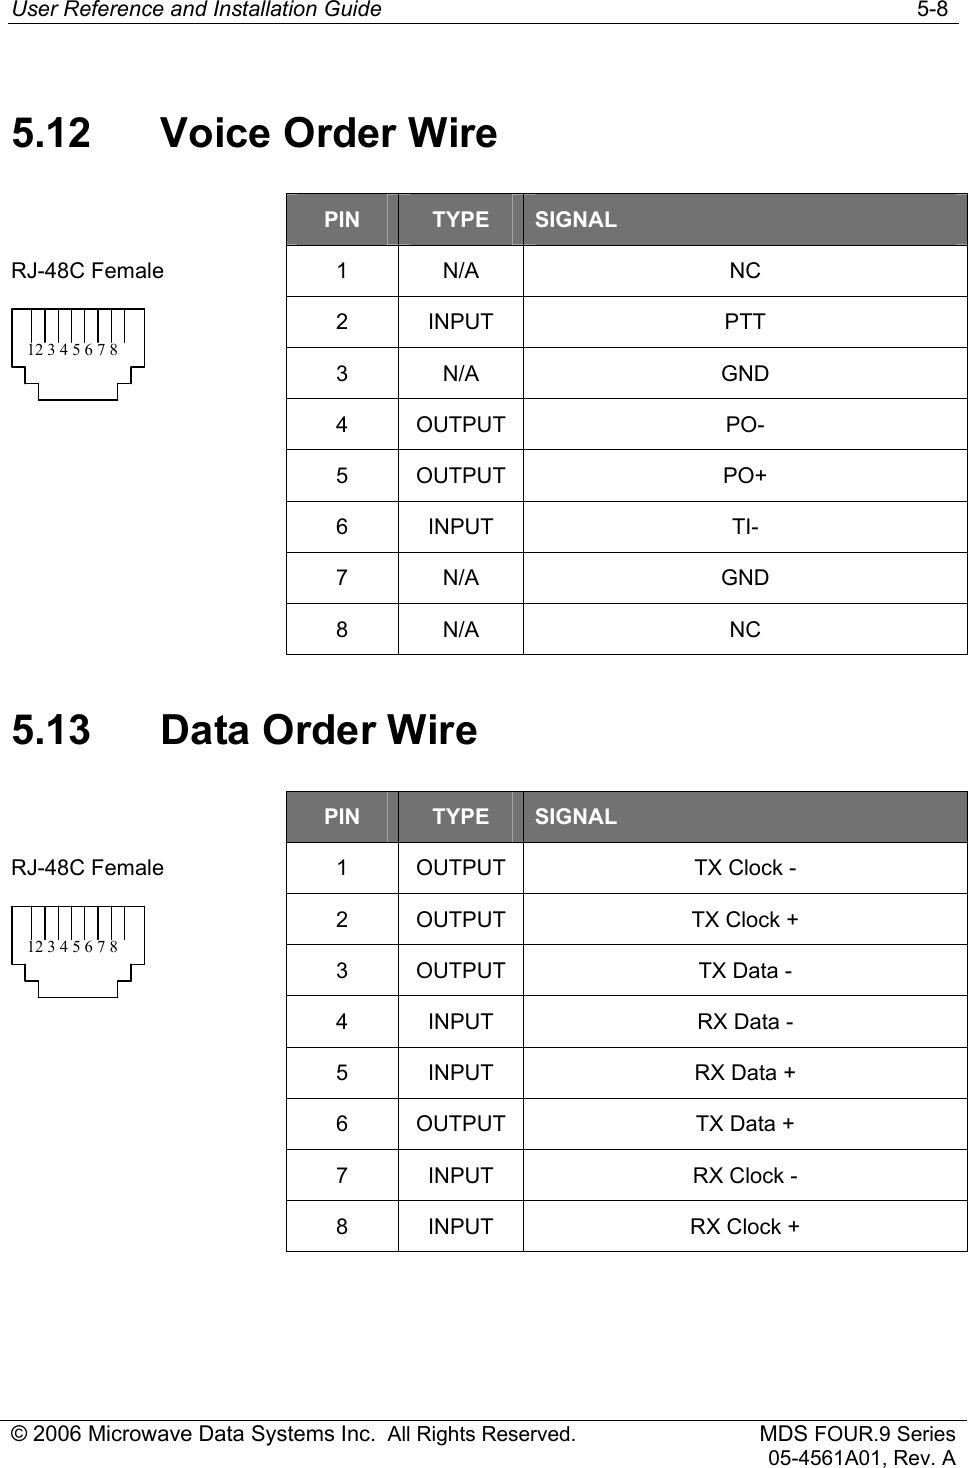 User Reference and Installation Guide   5-8 © 2006 Microwave Data Systems Inc.  All Rights Reserved. MDS FOUR.9 Series 05-4561A01, Rev. A 5.12 Voice Order Wire  PIN  TYPE  SIGNAL 1 N/A  NC 2 INPUT  PTT 3 N/A  GND 4 OUTPUT  PO- RJ-48C Female 12 3 4 5 6 7 8  5 OUTPUT  PO+  6 INPUT  TI-  7 N/A  GND  8 N/A  NC 5.13 Data Order Wire  PIN  TYPE  SIGNAL 1  OUTPUT  TX Clock - 2  OUTPUT  TX Clock + 3  OUTPUT  TX Data - 4  INPUT  RX Data - RJ-48C Female 12 3 4 5 6 7 8  5  INPUT  RX Data +   6  OUTPUT  TX Data +   7  INPUT  RX Clock -   8  INPUT  RX Clock + 